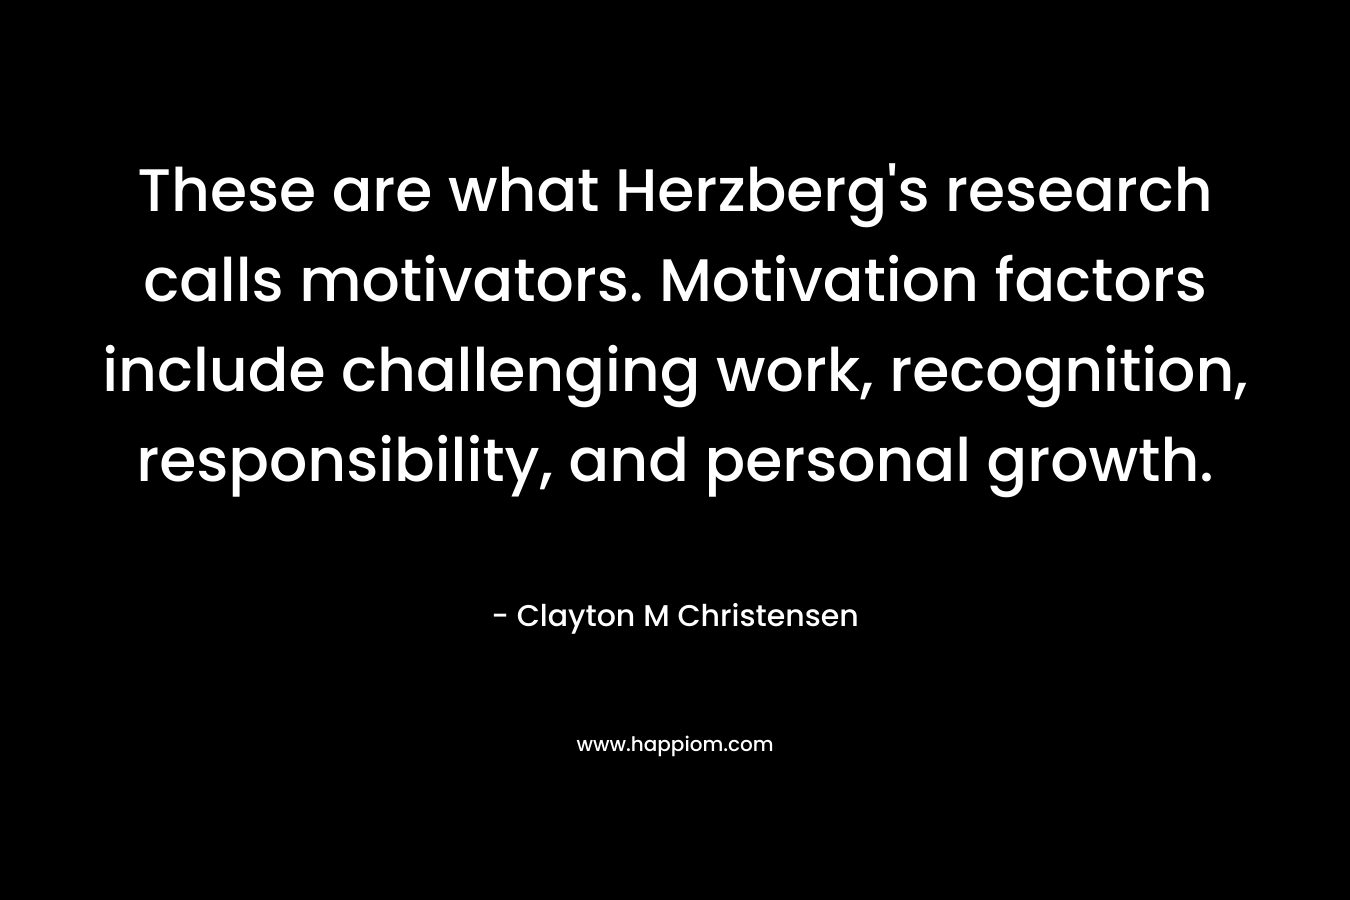 These are what Herzberg’s research calls motivators. Motivation factors include challenging work, recognition, responsibility, and personal growth. – Clayton M Christensen